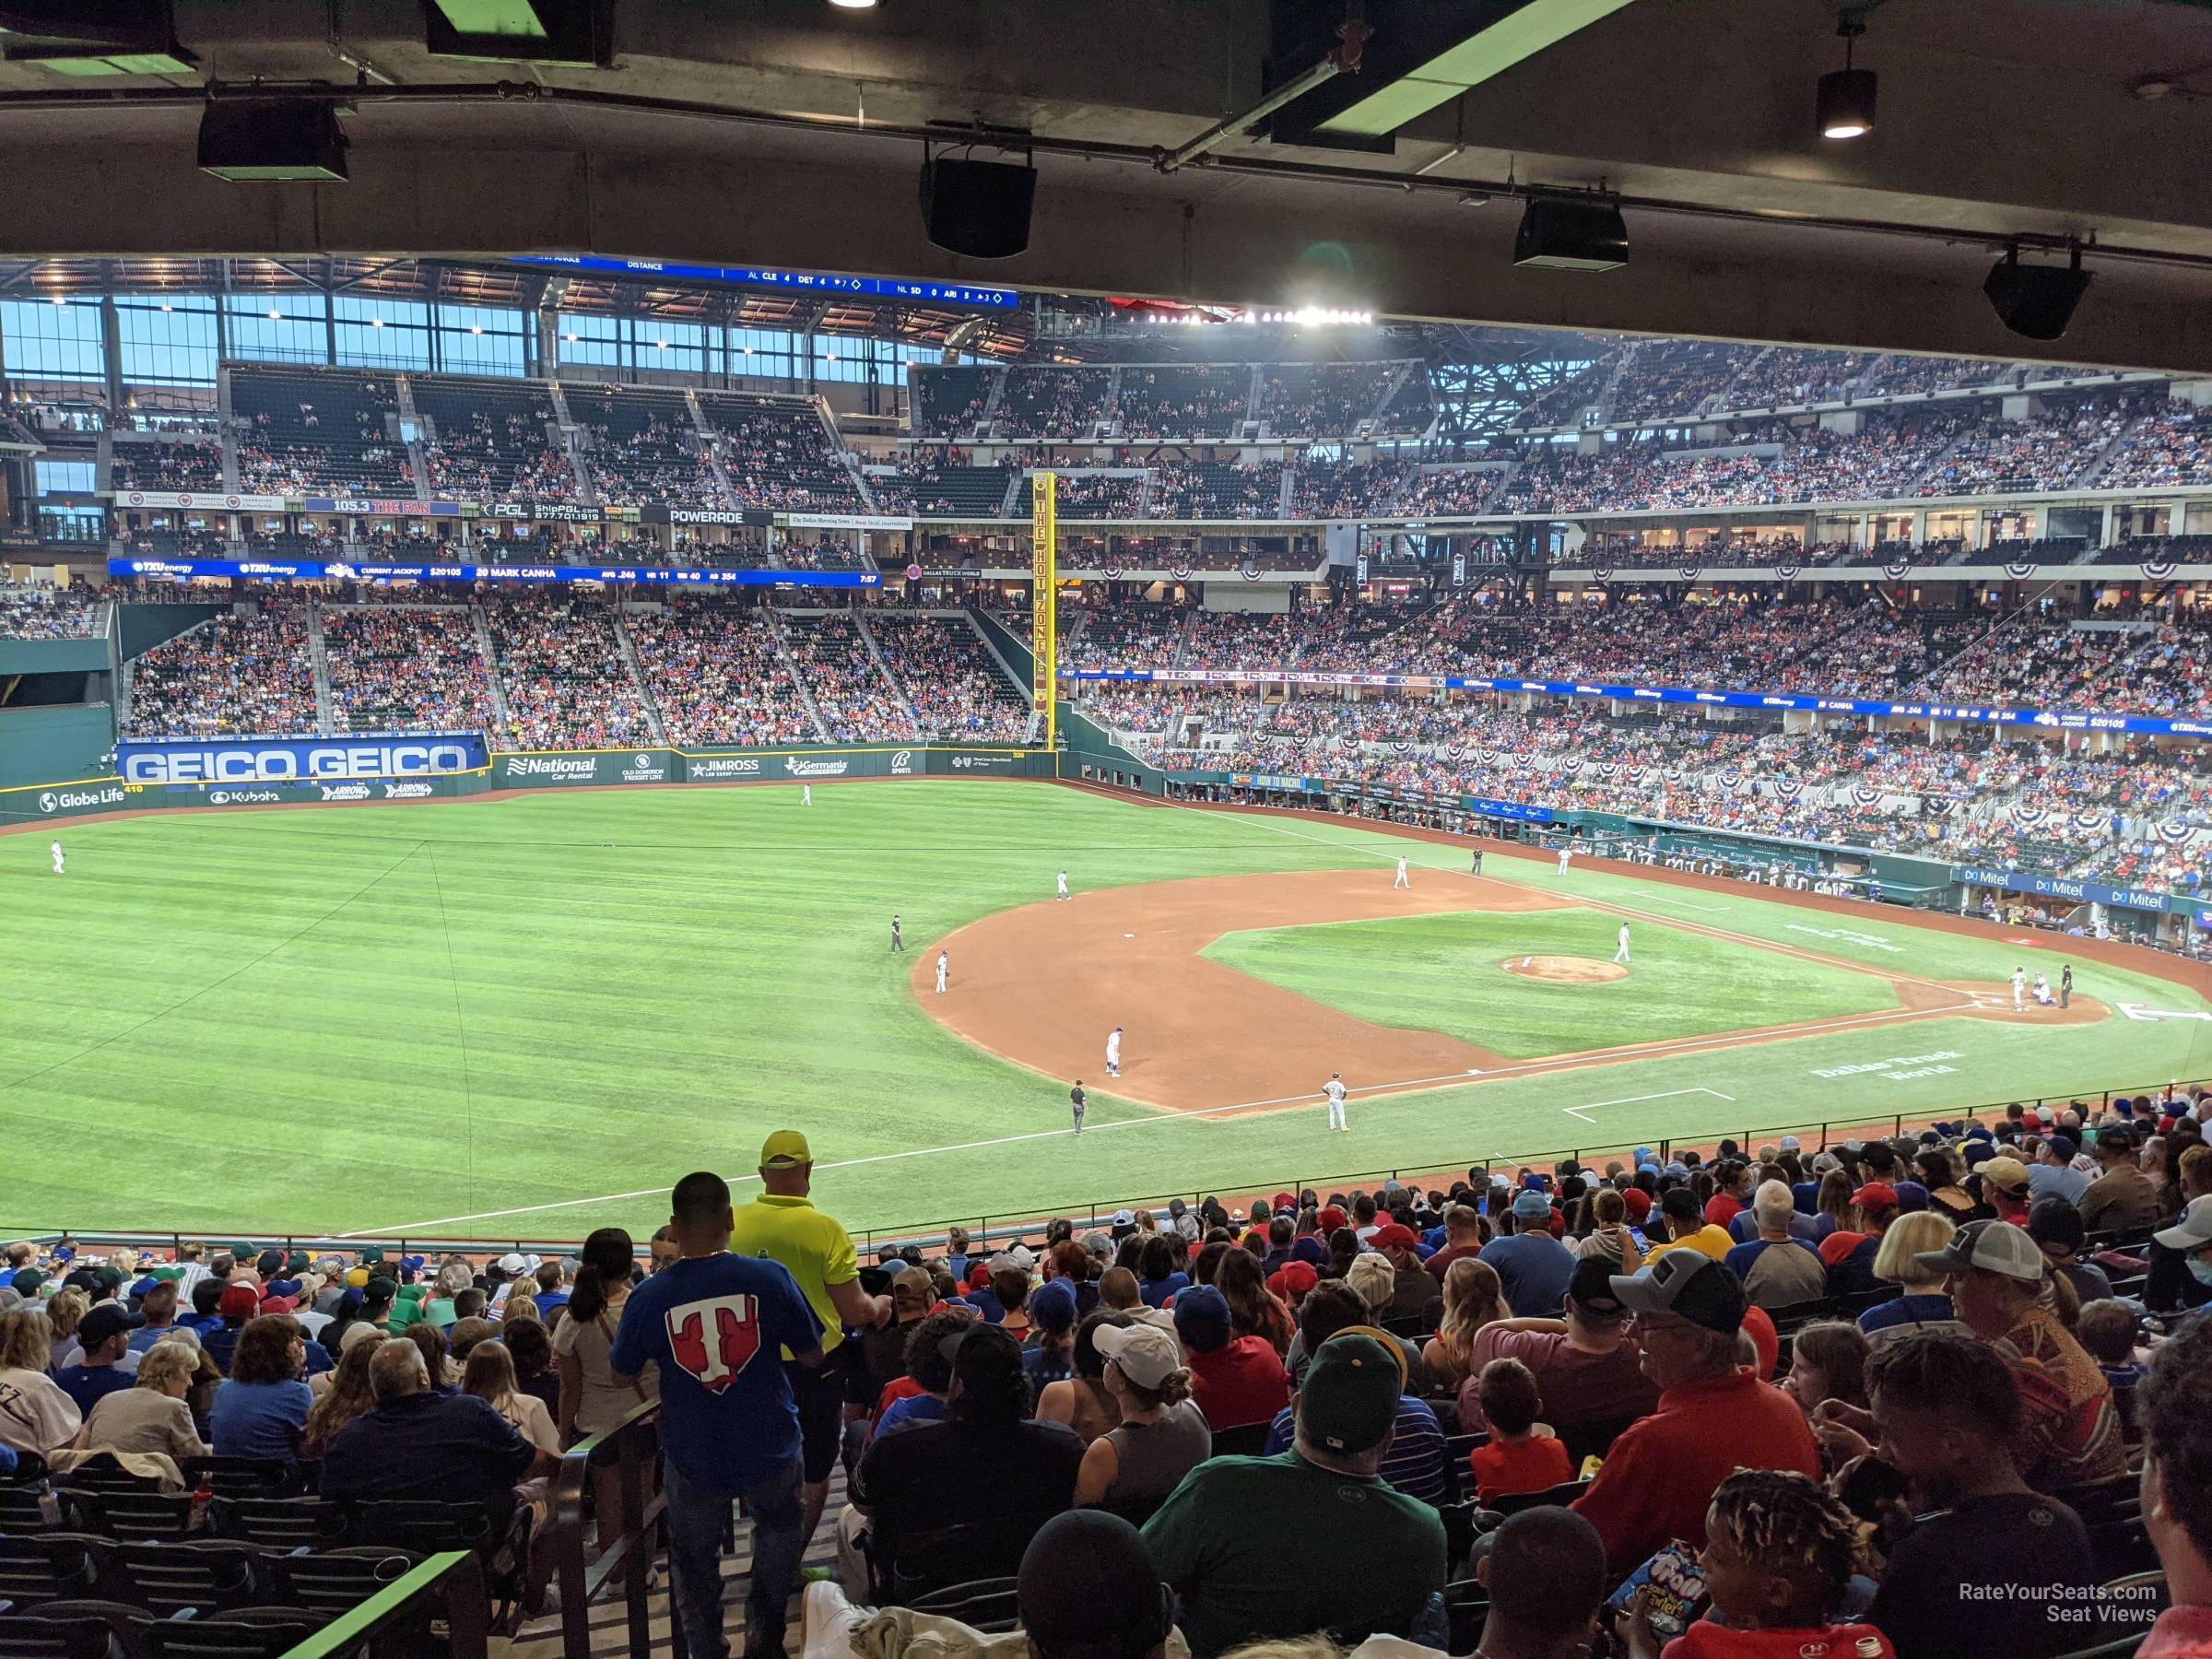 section 106, row 19 seat view  - globe life field